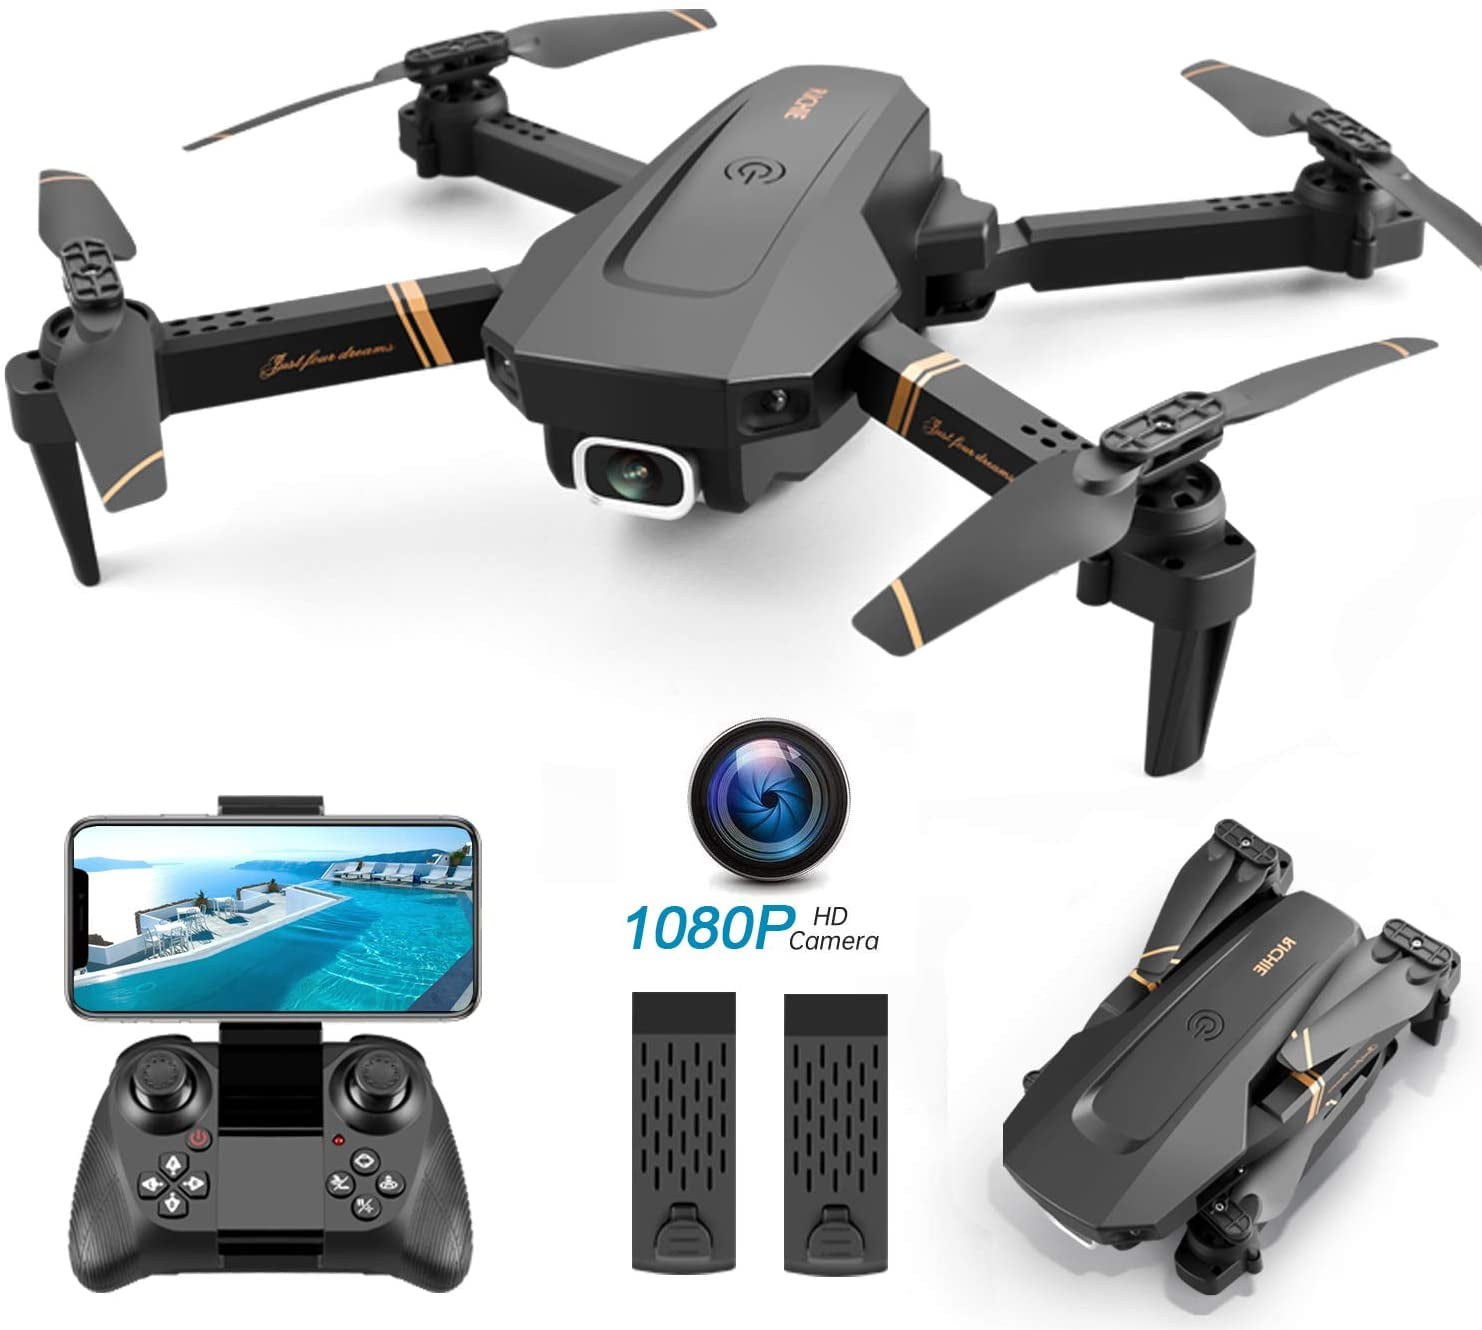 Headless Mode One Key Return Foldable Drone with 4K UHD Dual Camera Altitude Hold GPS Aerial Photography Drone with WiFi FPV Live Video Suitable for Beginners Kids Adults 2 Modular Batteries